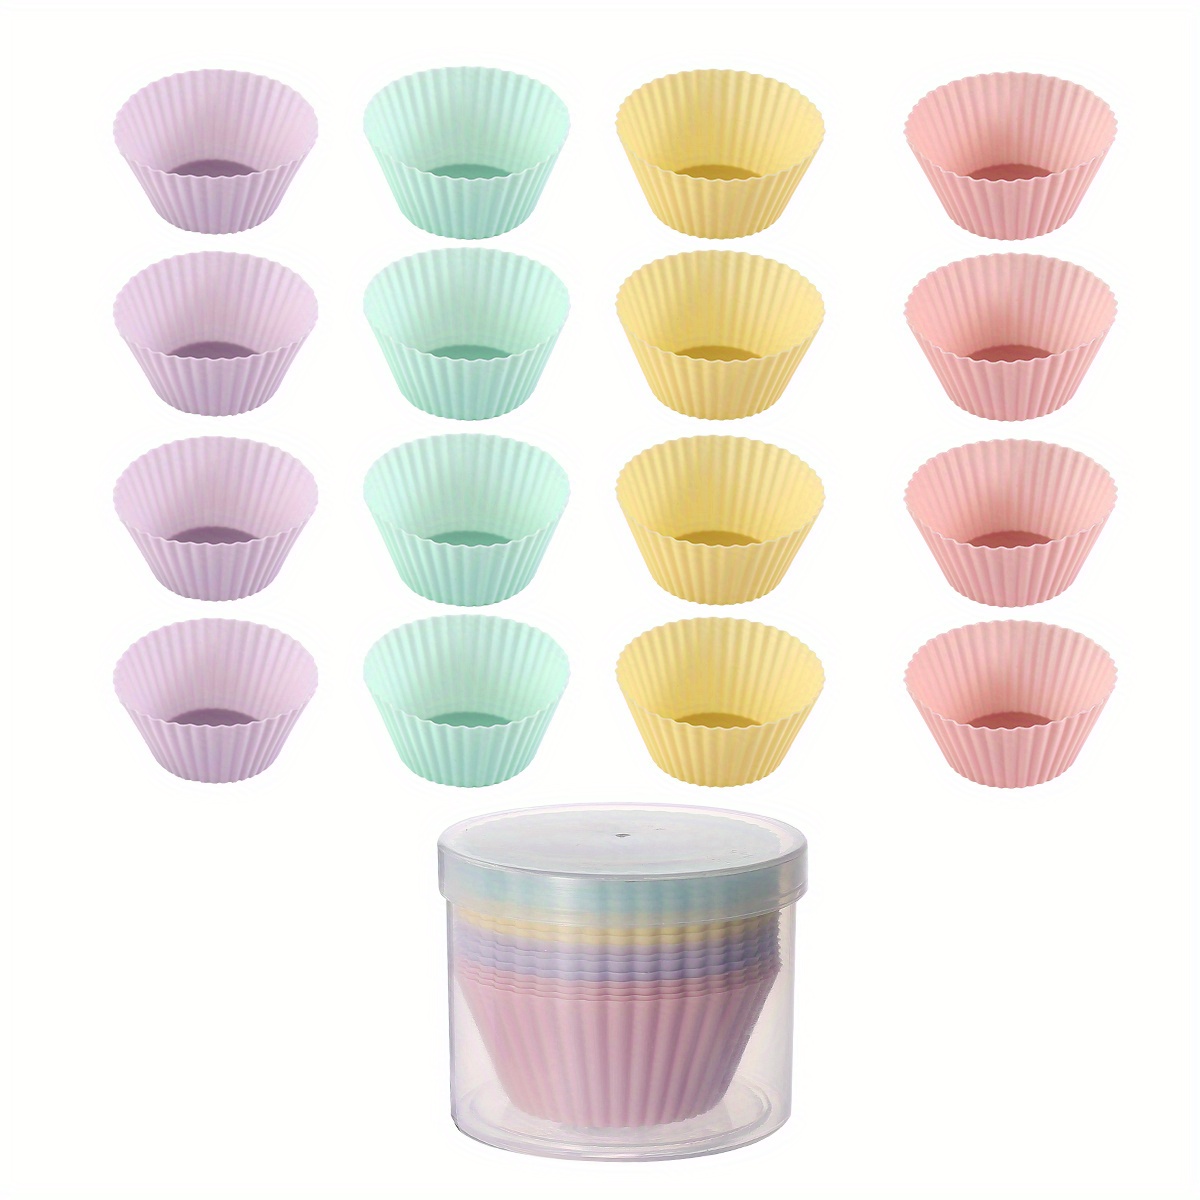 Dropship 12pcs/Set, Silicone Baking Cups, Reusable Cupcake Liners, Home  Cake Molds, Standard Size Muffin Liners, Dishwasher Safe, Baking Tools,  Kitchen Gadgets, Kitchen Accessories to Sell Online at a Lower Price